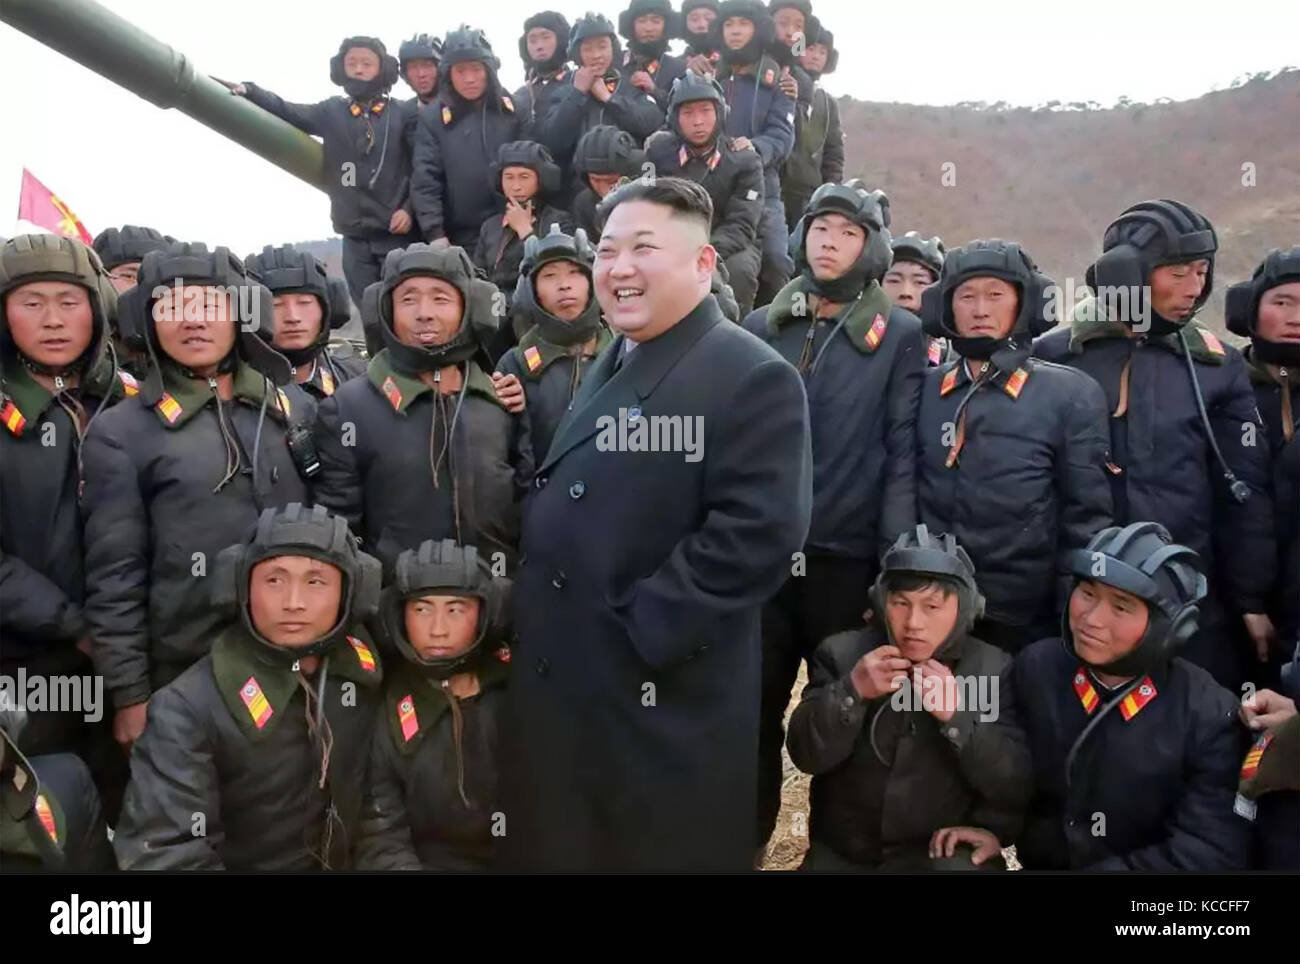 KIM JONG-UN with a group of tank soldiers on Jangjae Island. Undated photo issued by KCNA (North Korean Central News Agency) in April 2017. Stock Photo